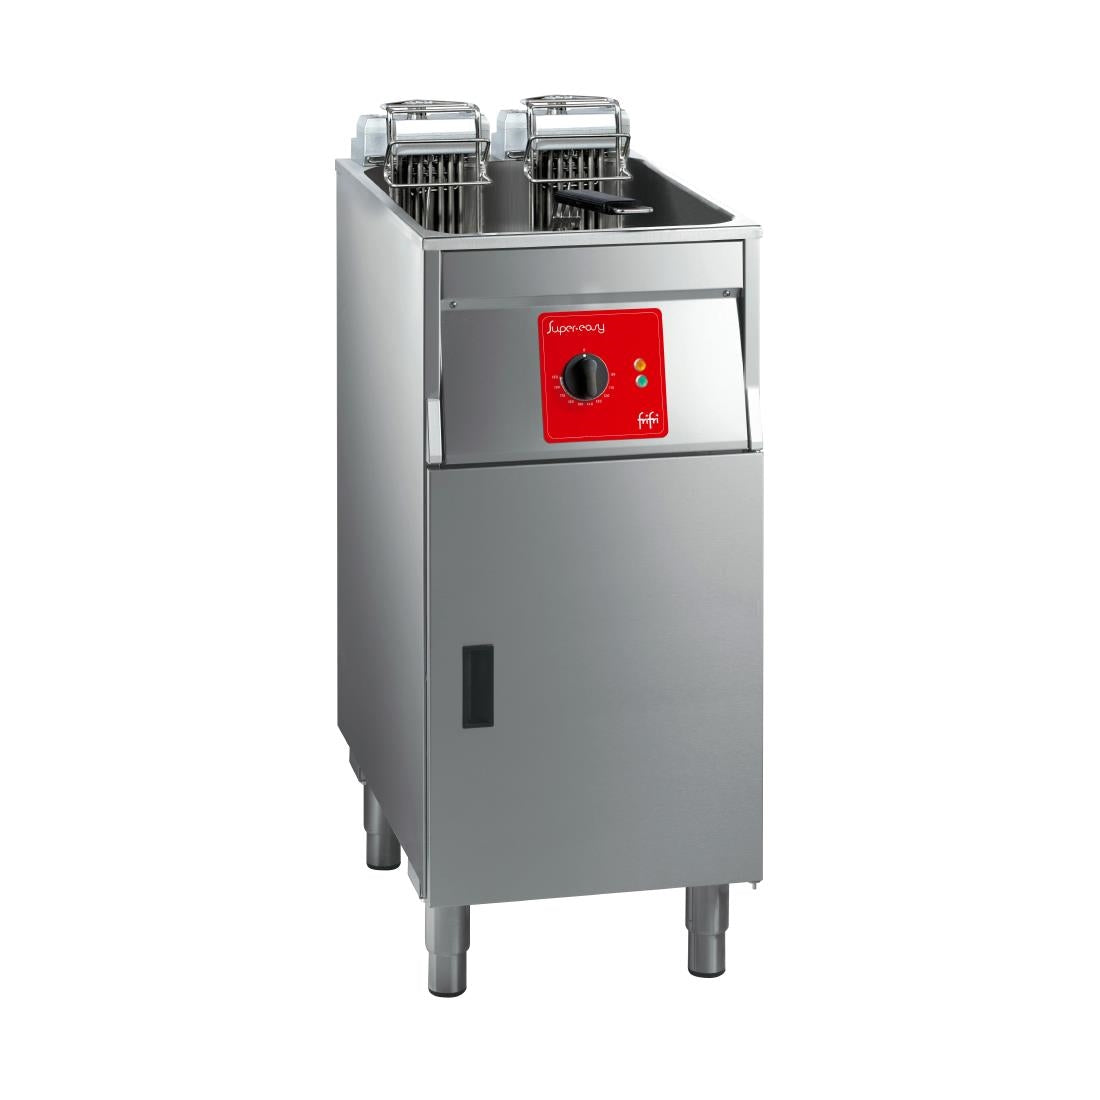 HS056-3PH FriFri Super Easy 411 Electric Free-Standing Single Tank Fryer with Filtration 1 Basket 22kW - Three Phase